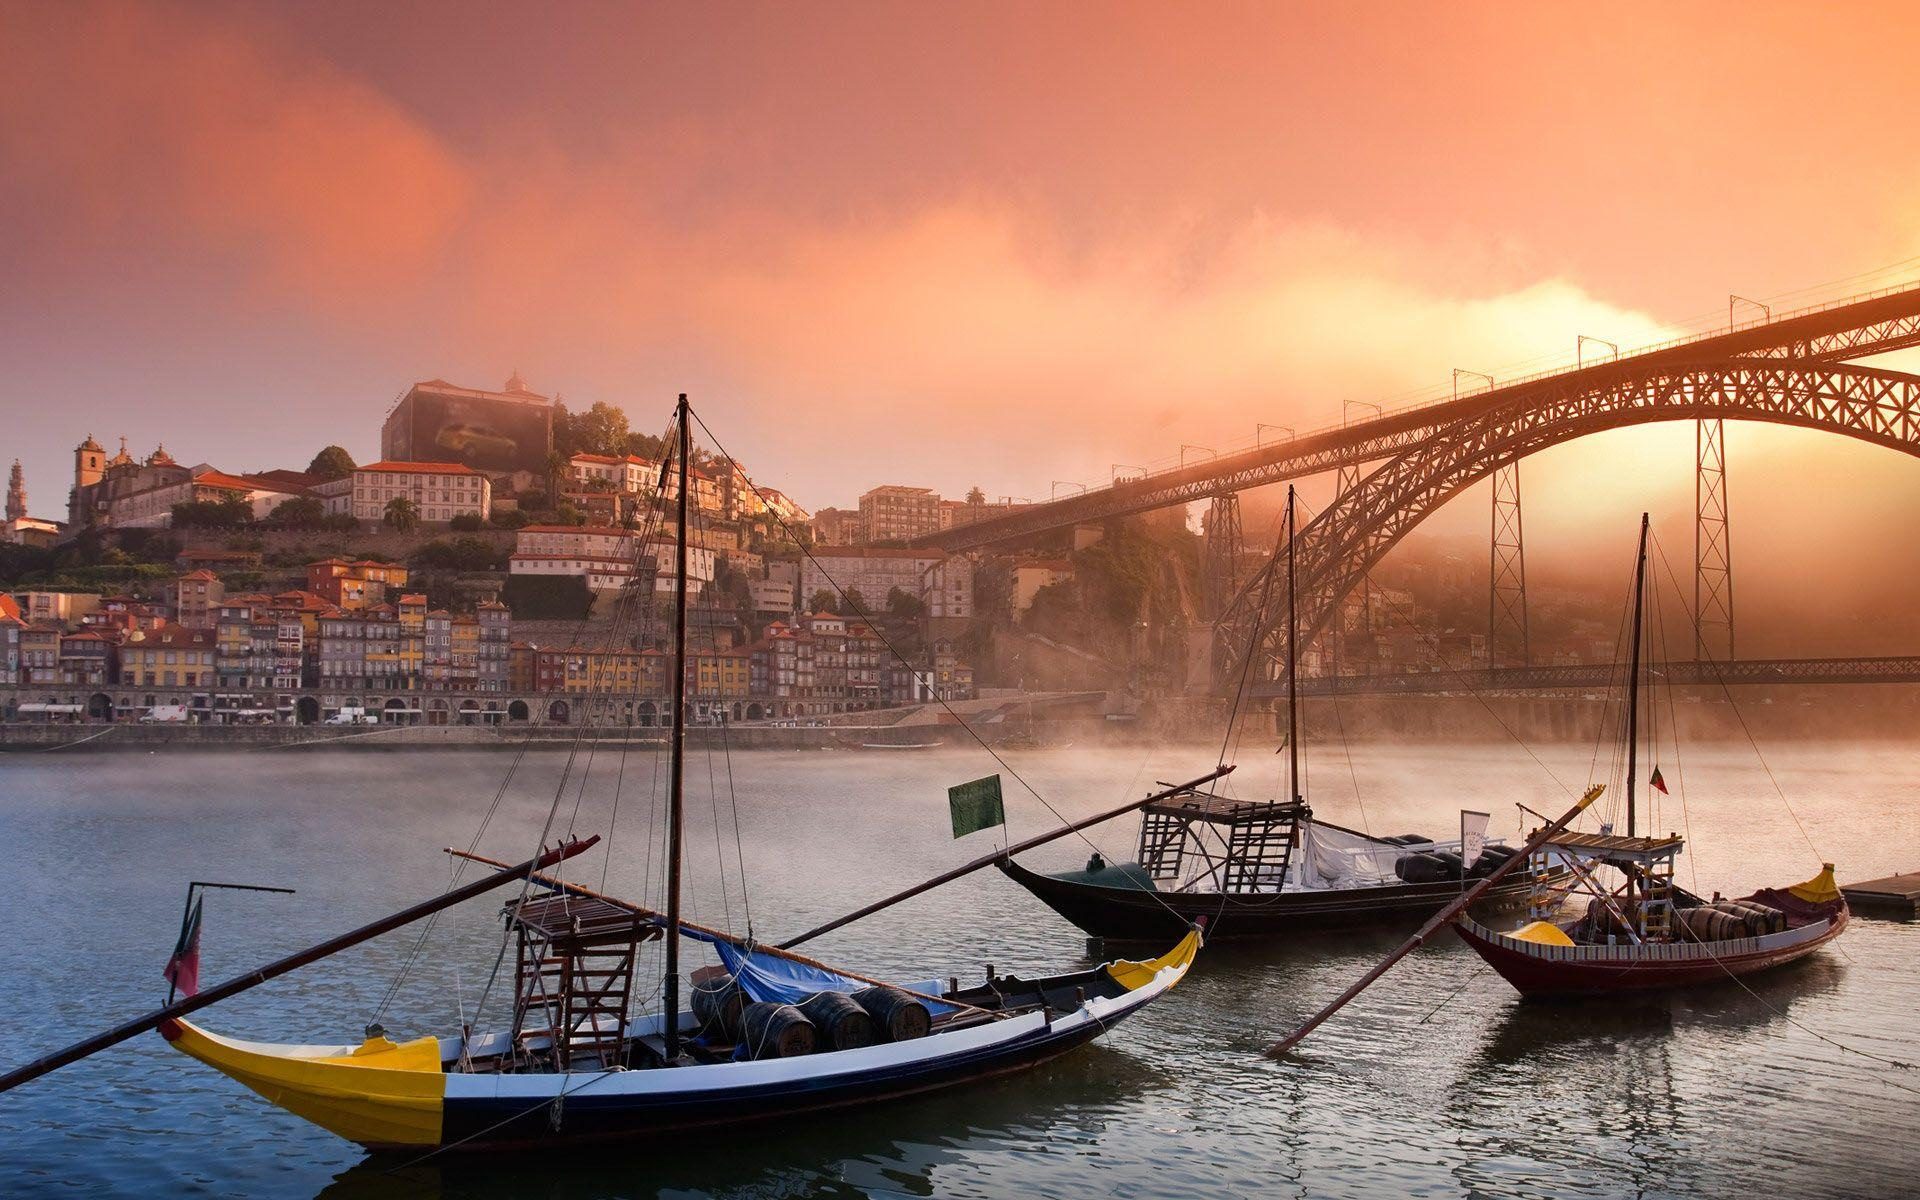 The essential guide to Non-Habitual Residency in Portugal